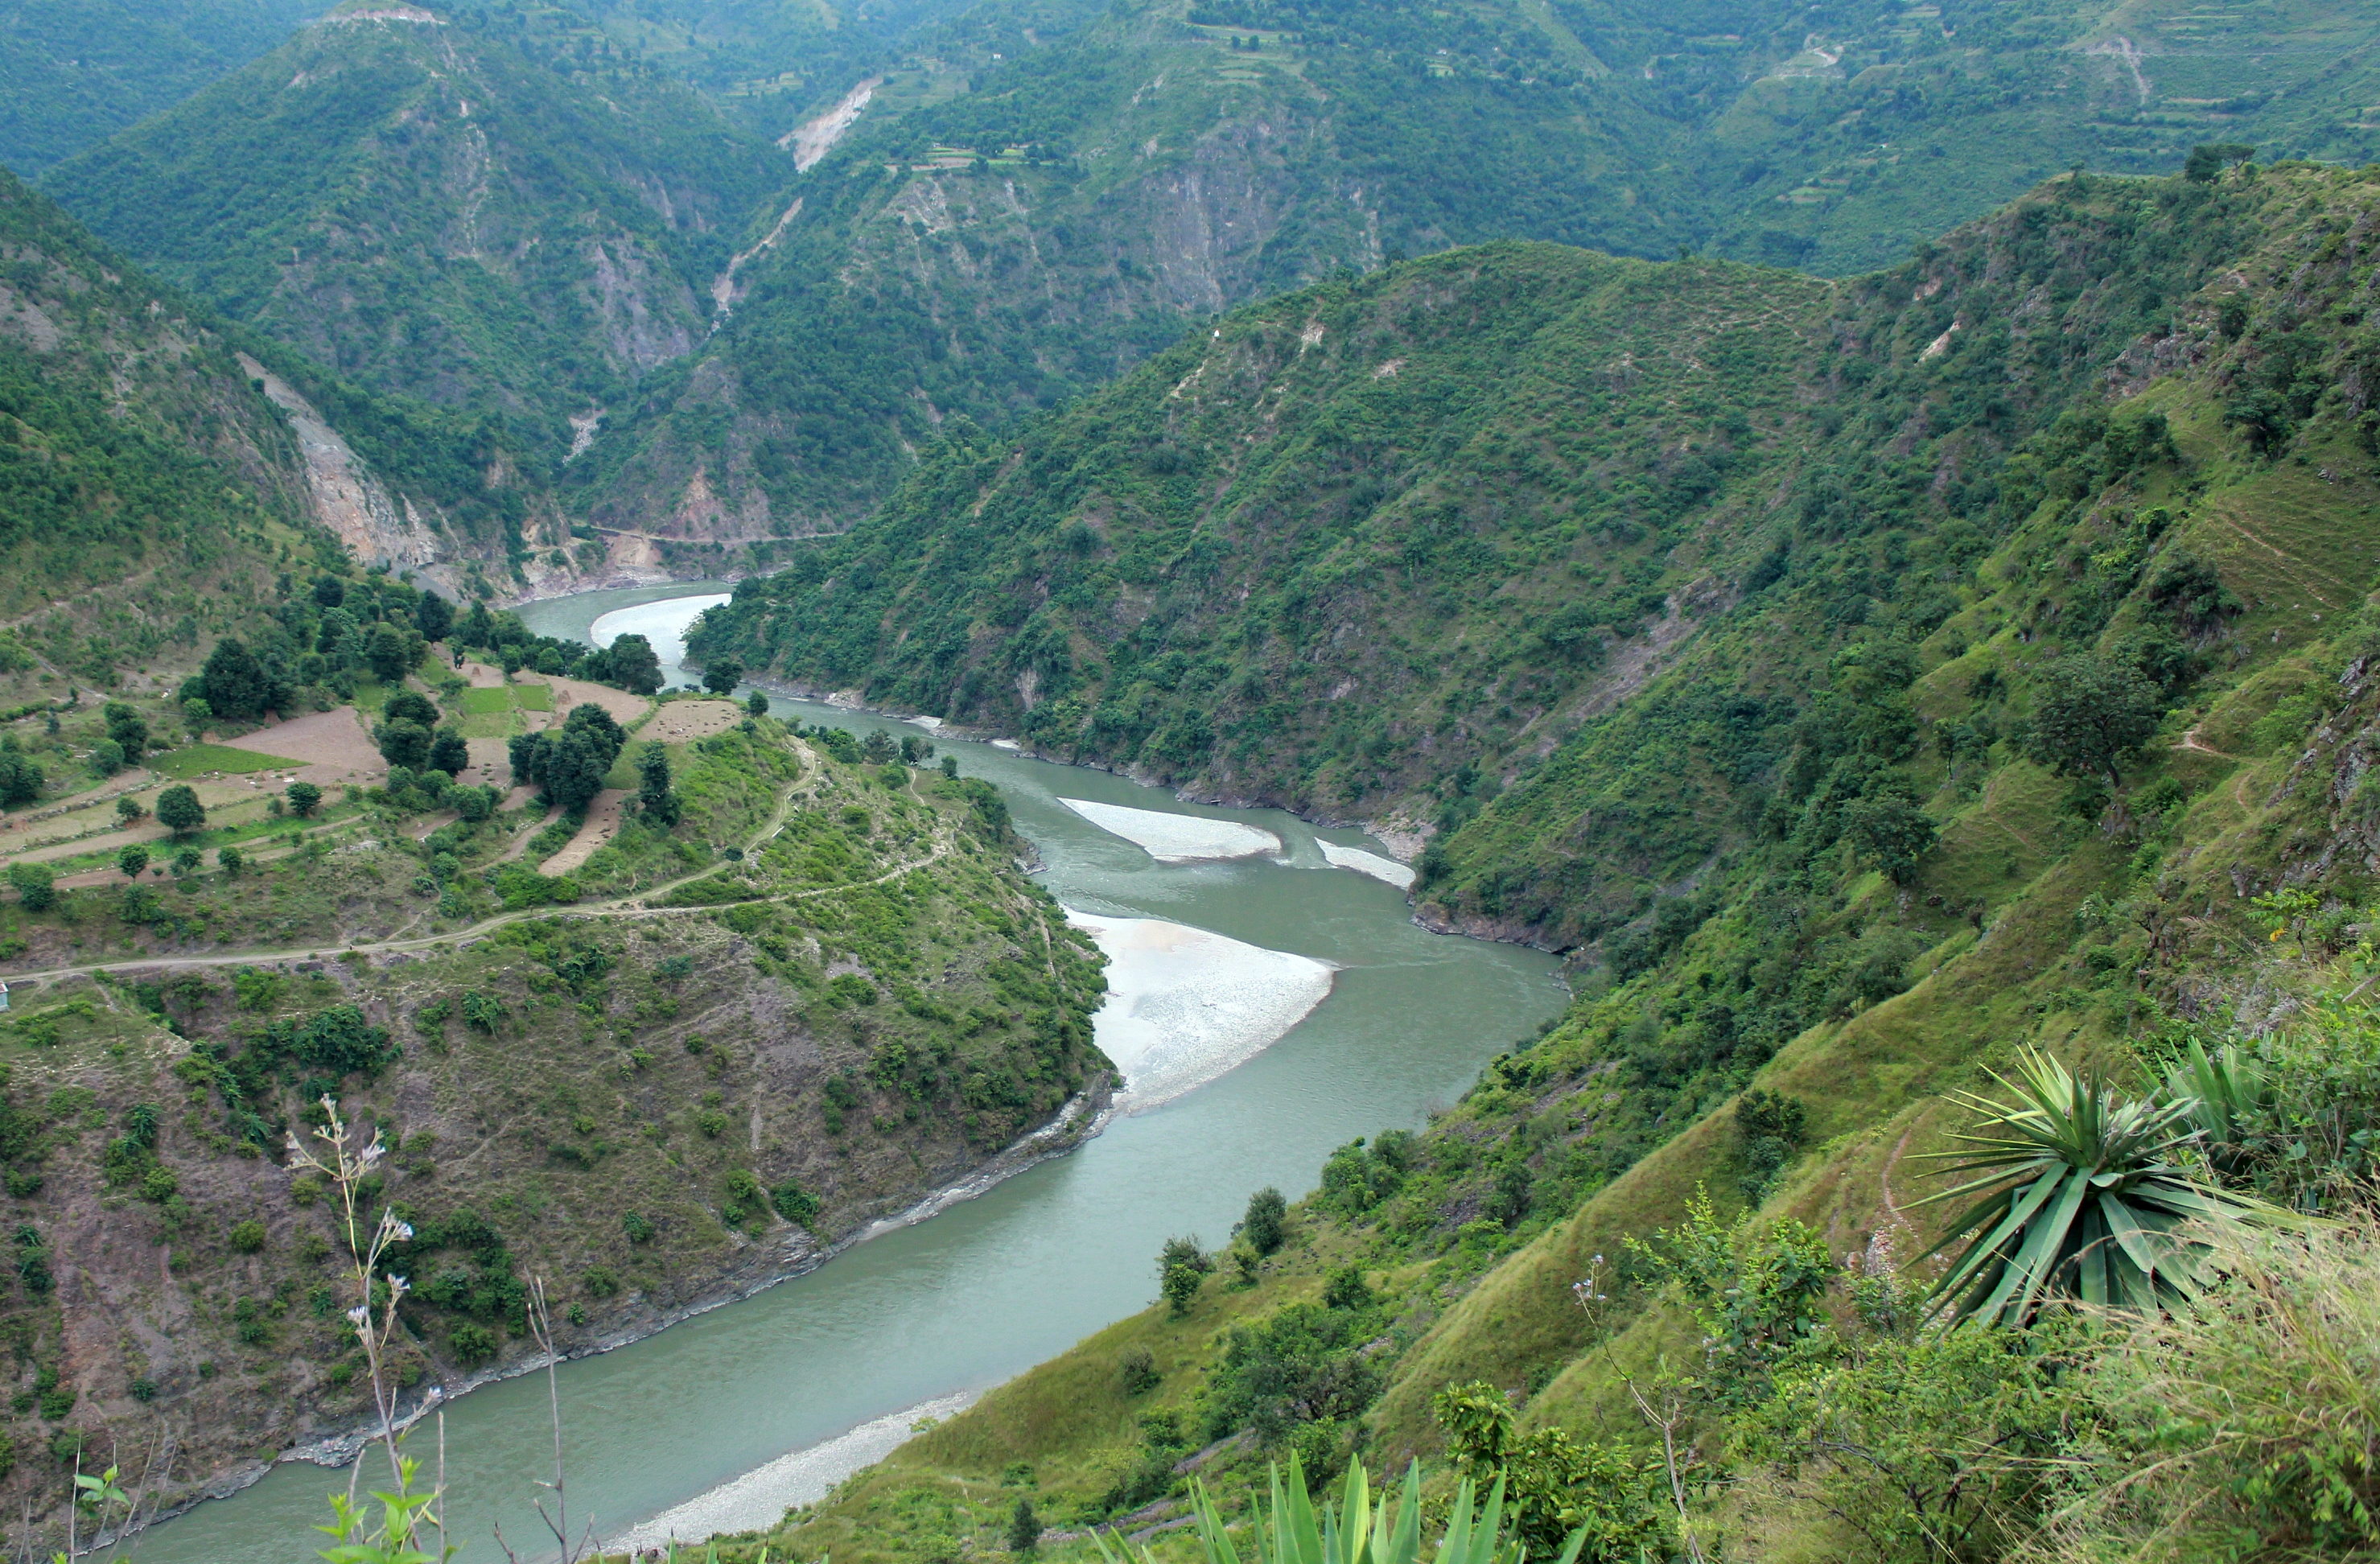 The dam site for 660 MW Kishau hydropower project proposed on River Tons, the largest tributary of the Yamuna bordering both Uttarakhand and Himachal Pradesh. The Kishau dam is being envisaged as the second highest dam after Tehri in India.                                                                                                                                                    Pic Date : 12/10/2013